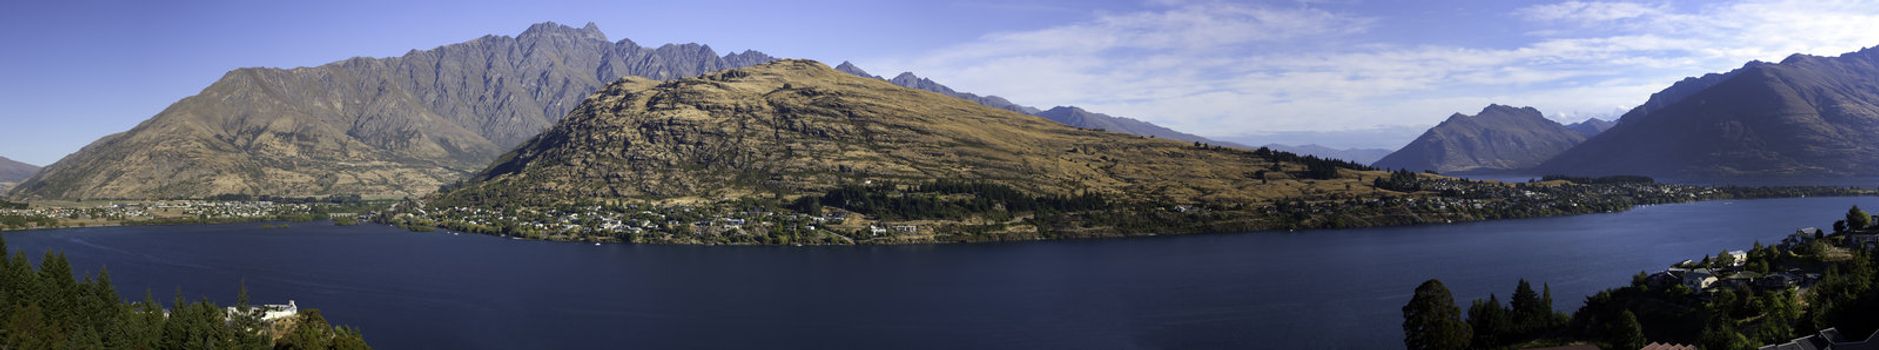 Panorama of Lake Wakatipu and the Remarkables, Queenstown, New Zealand